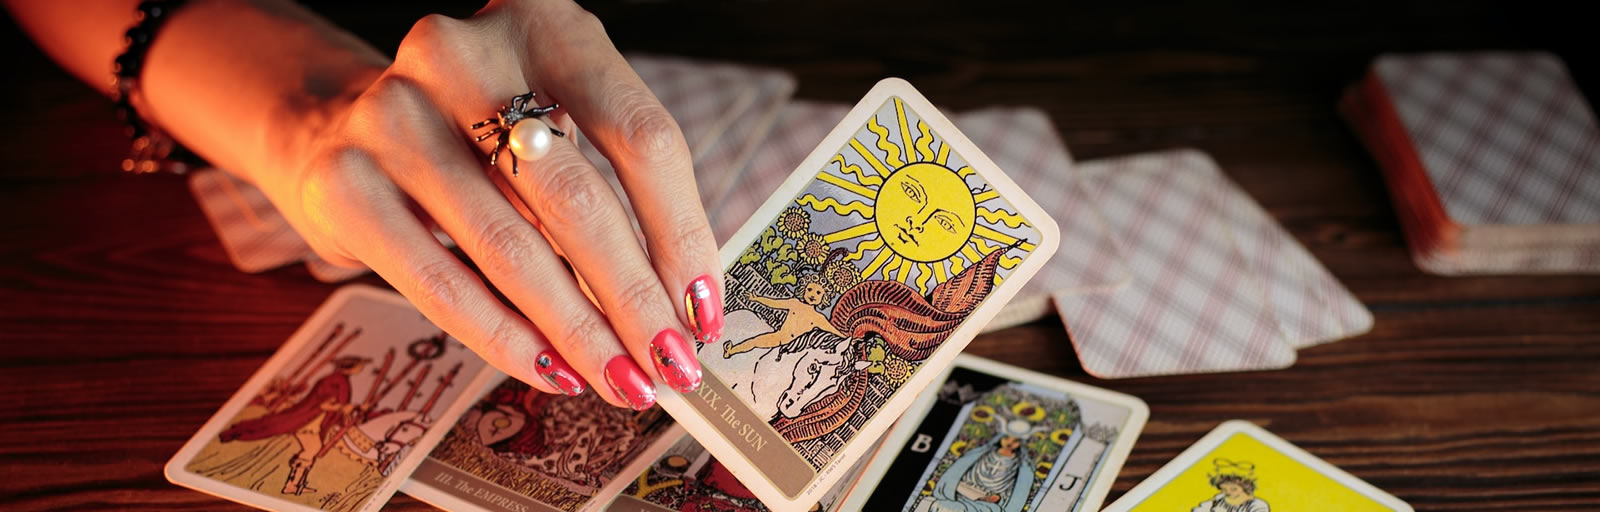 Healing Light, An introduction to Tarot cards and how they are used in psychic readings, Main photograph